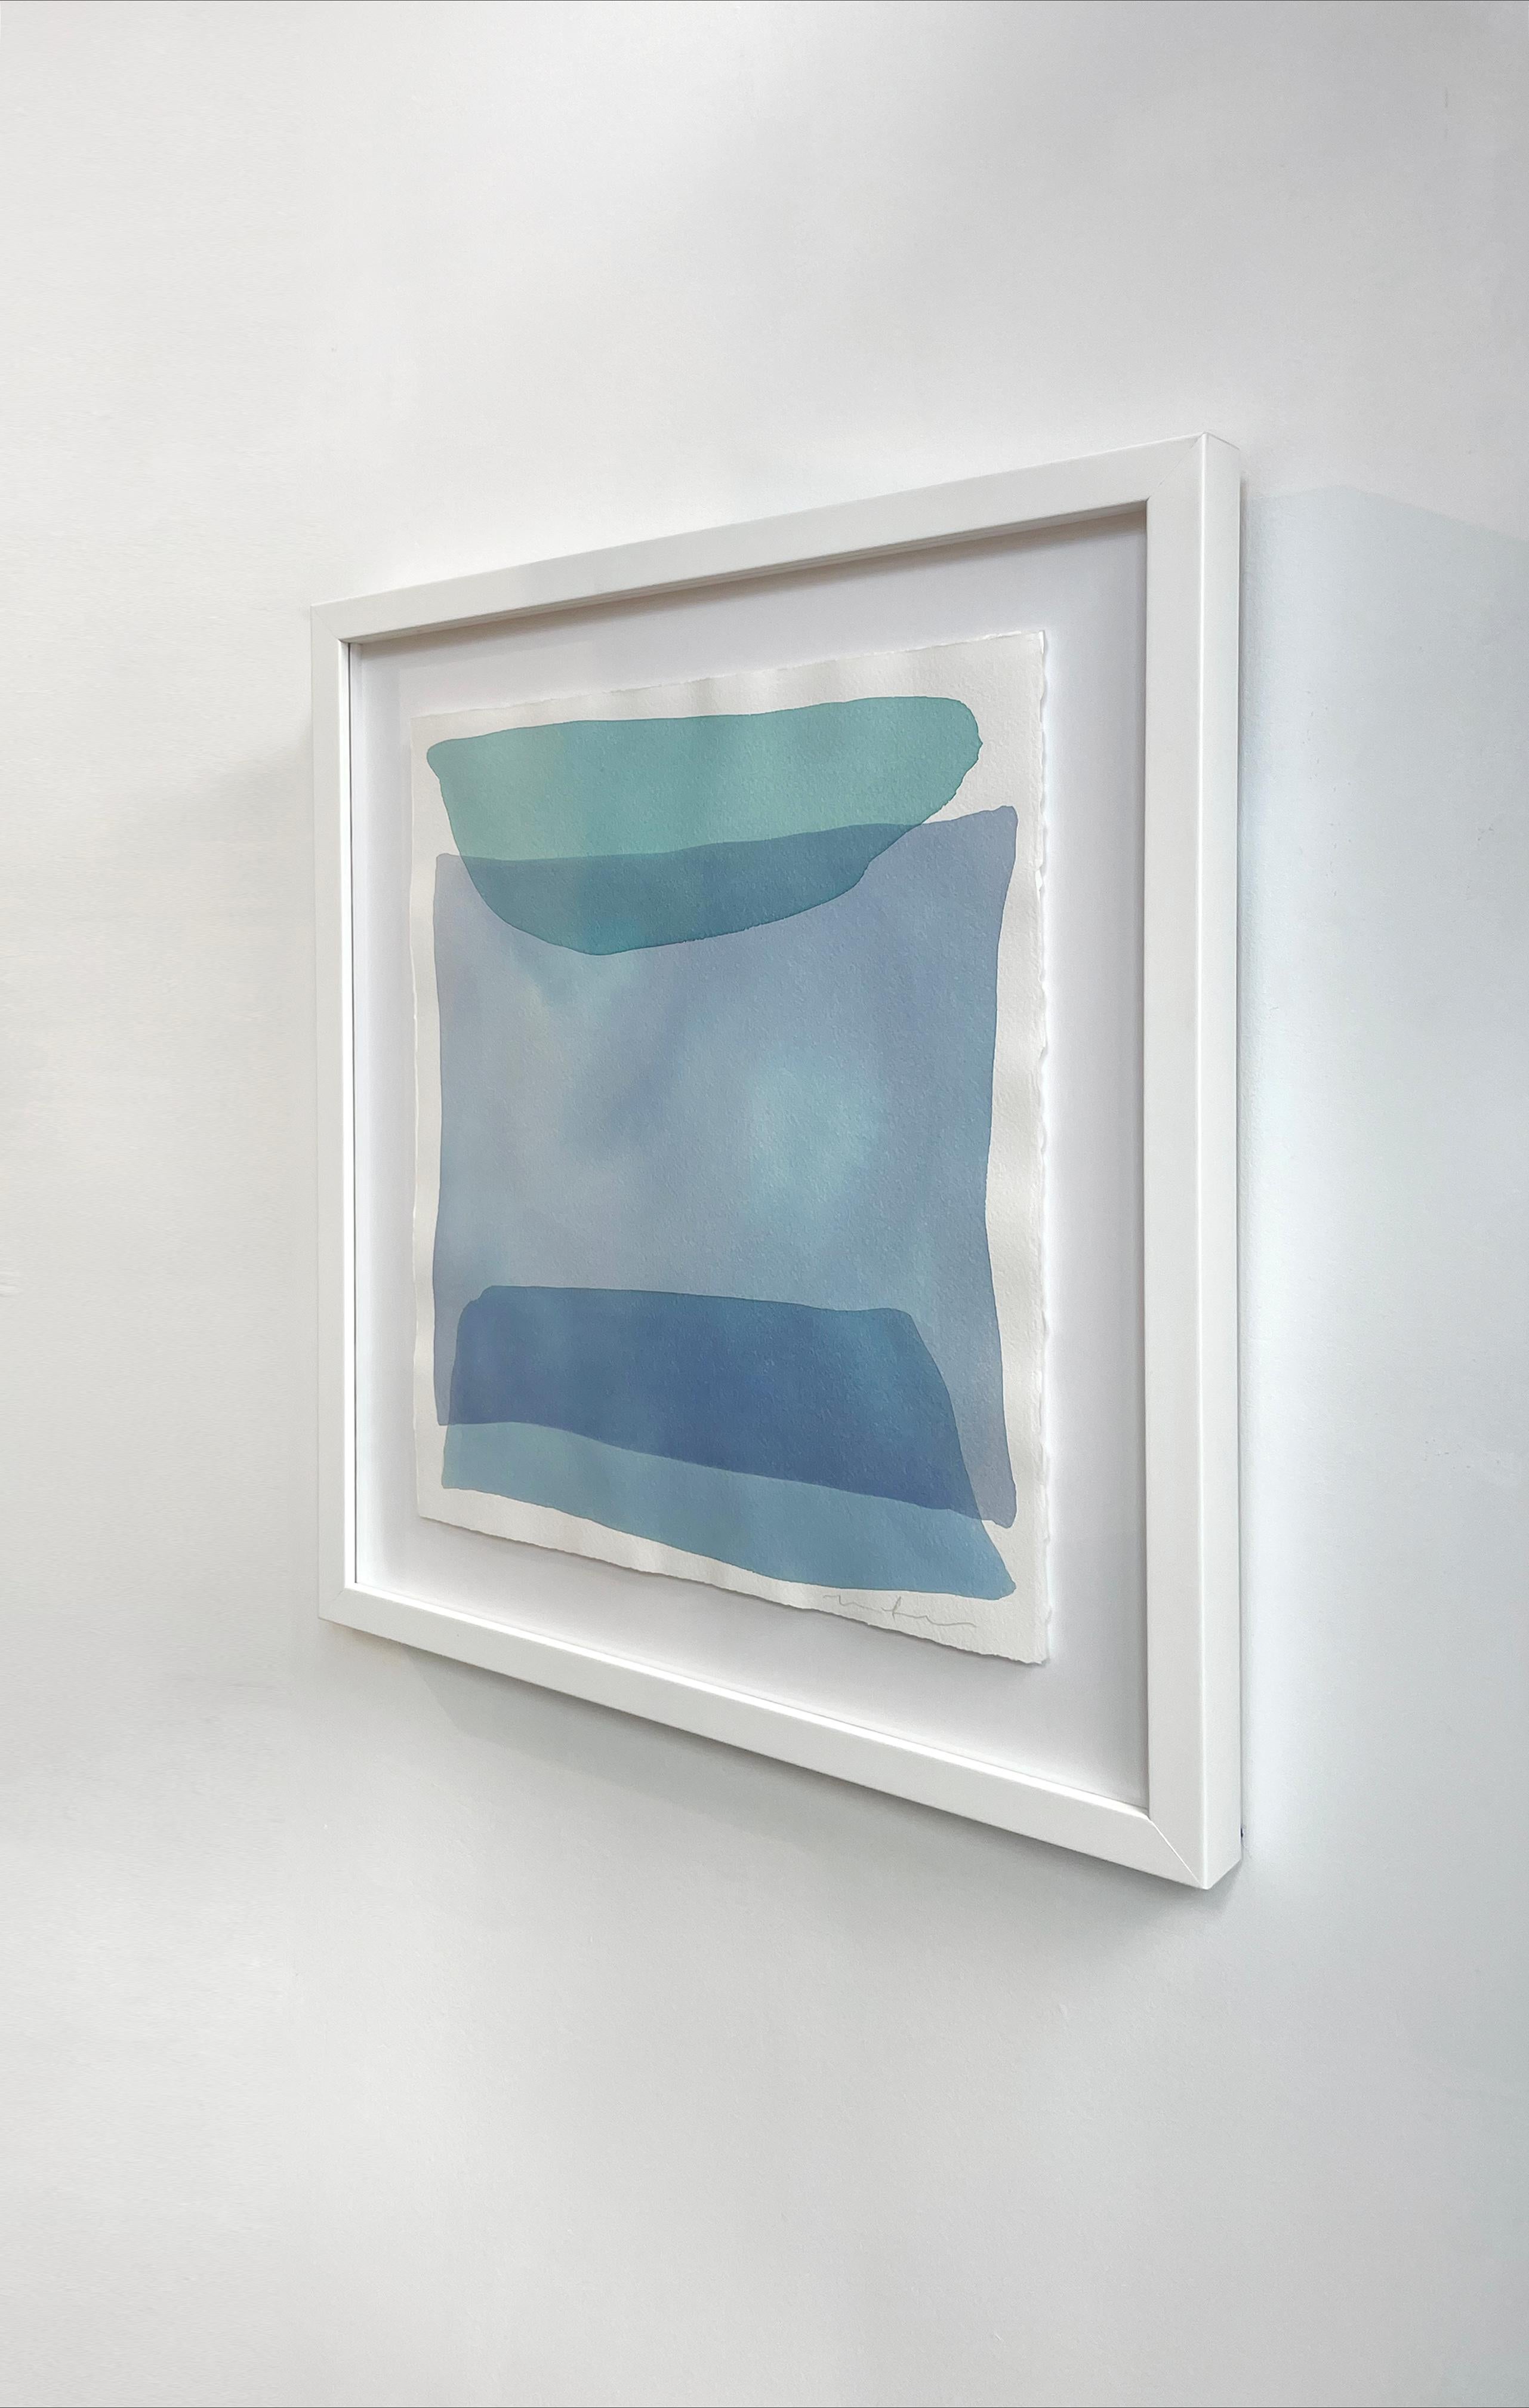 This small original abstract watercolor painting by Nealy Hauschildt features a palette that combines washes of varying blue and turquoise tones.  It is named for, and inspired by, the south shore beach in Nantucket, MA. The painting is 13.5